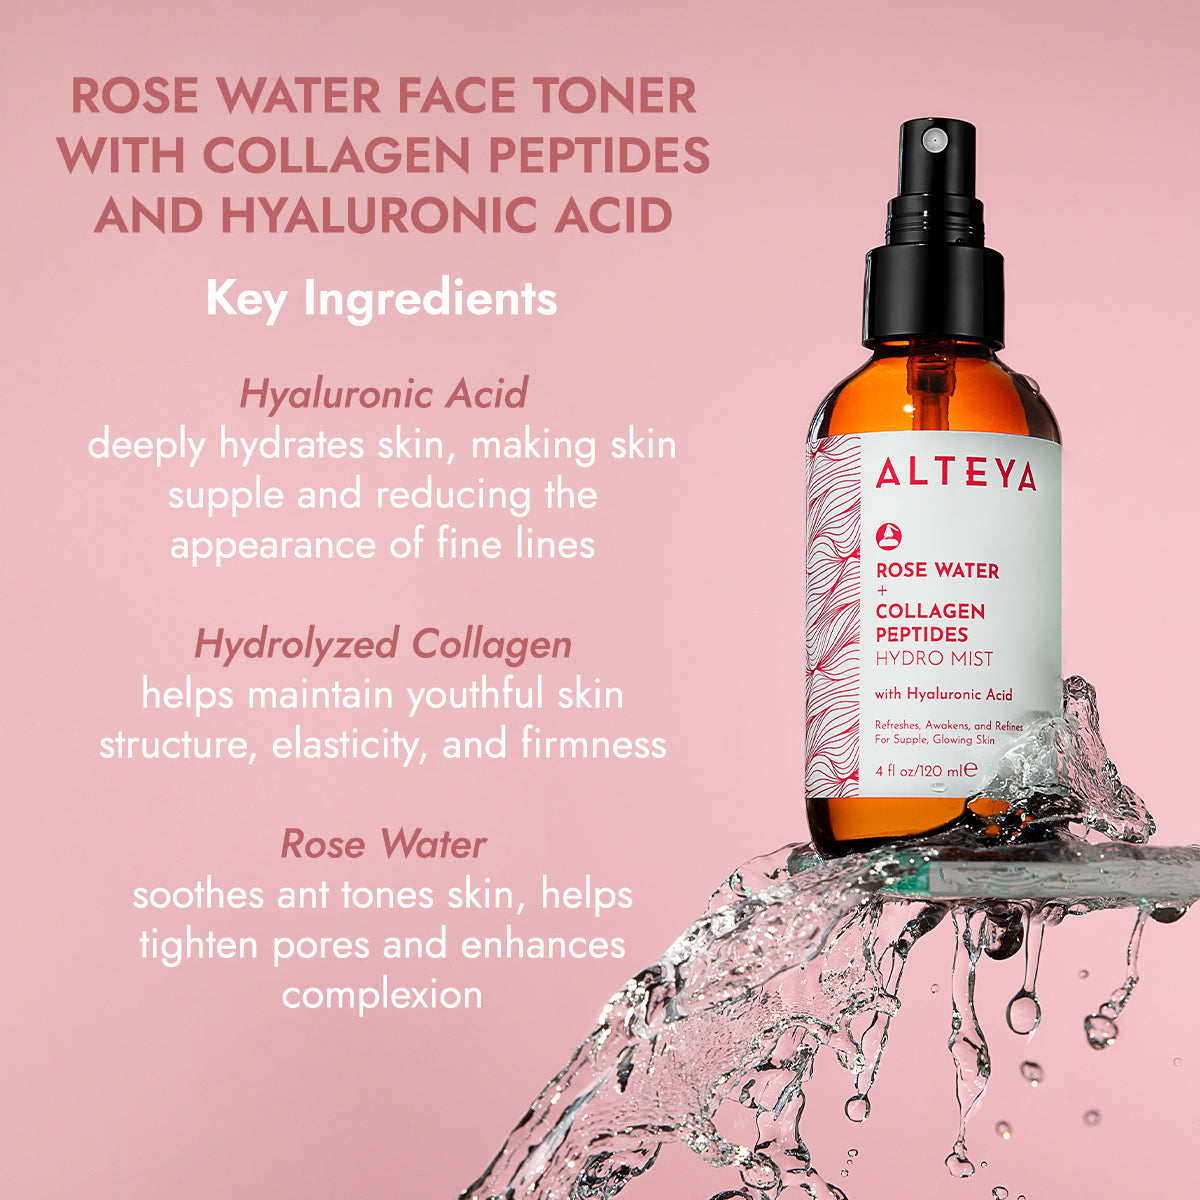 A Rose Water Face Toner with Collagen Peptides and Hyaluronic Acid for sensitive skin infused with collagen-derived peptides and hyaluronic acid.